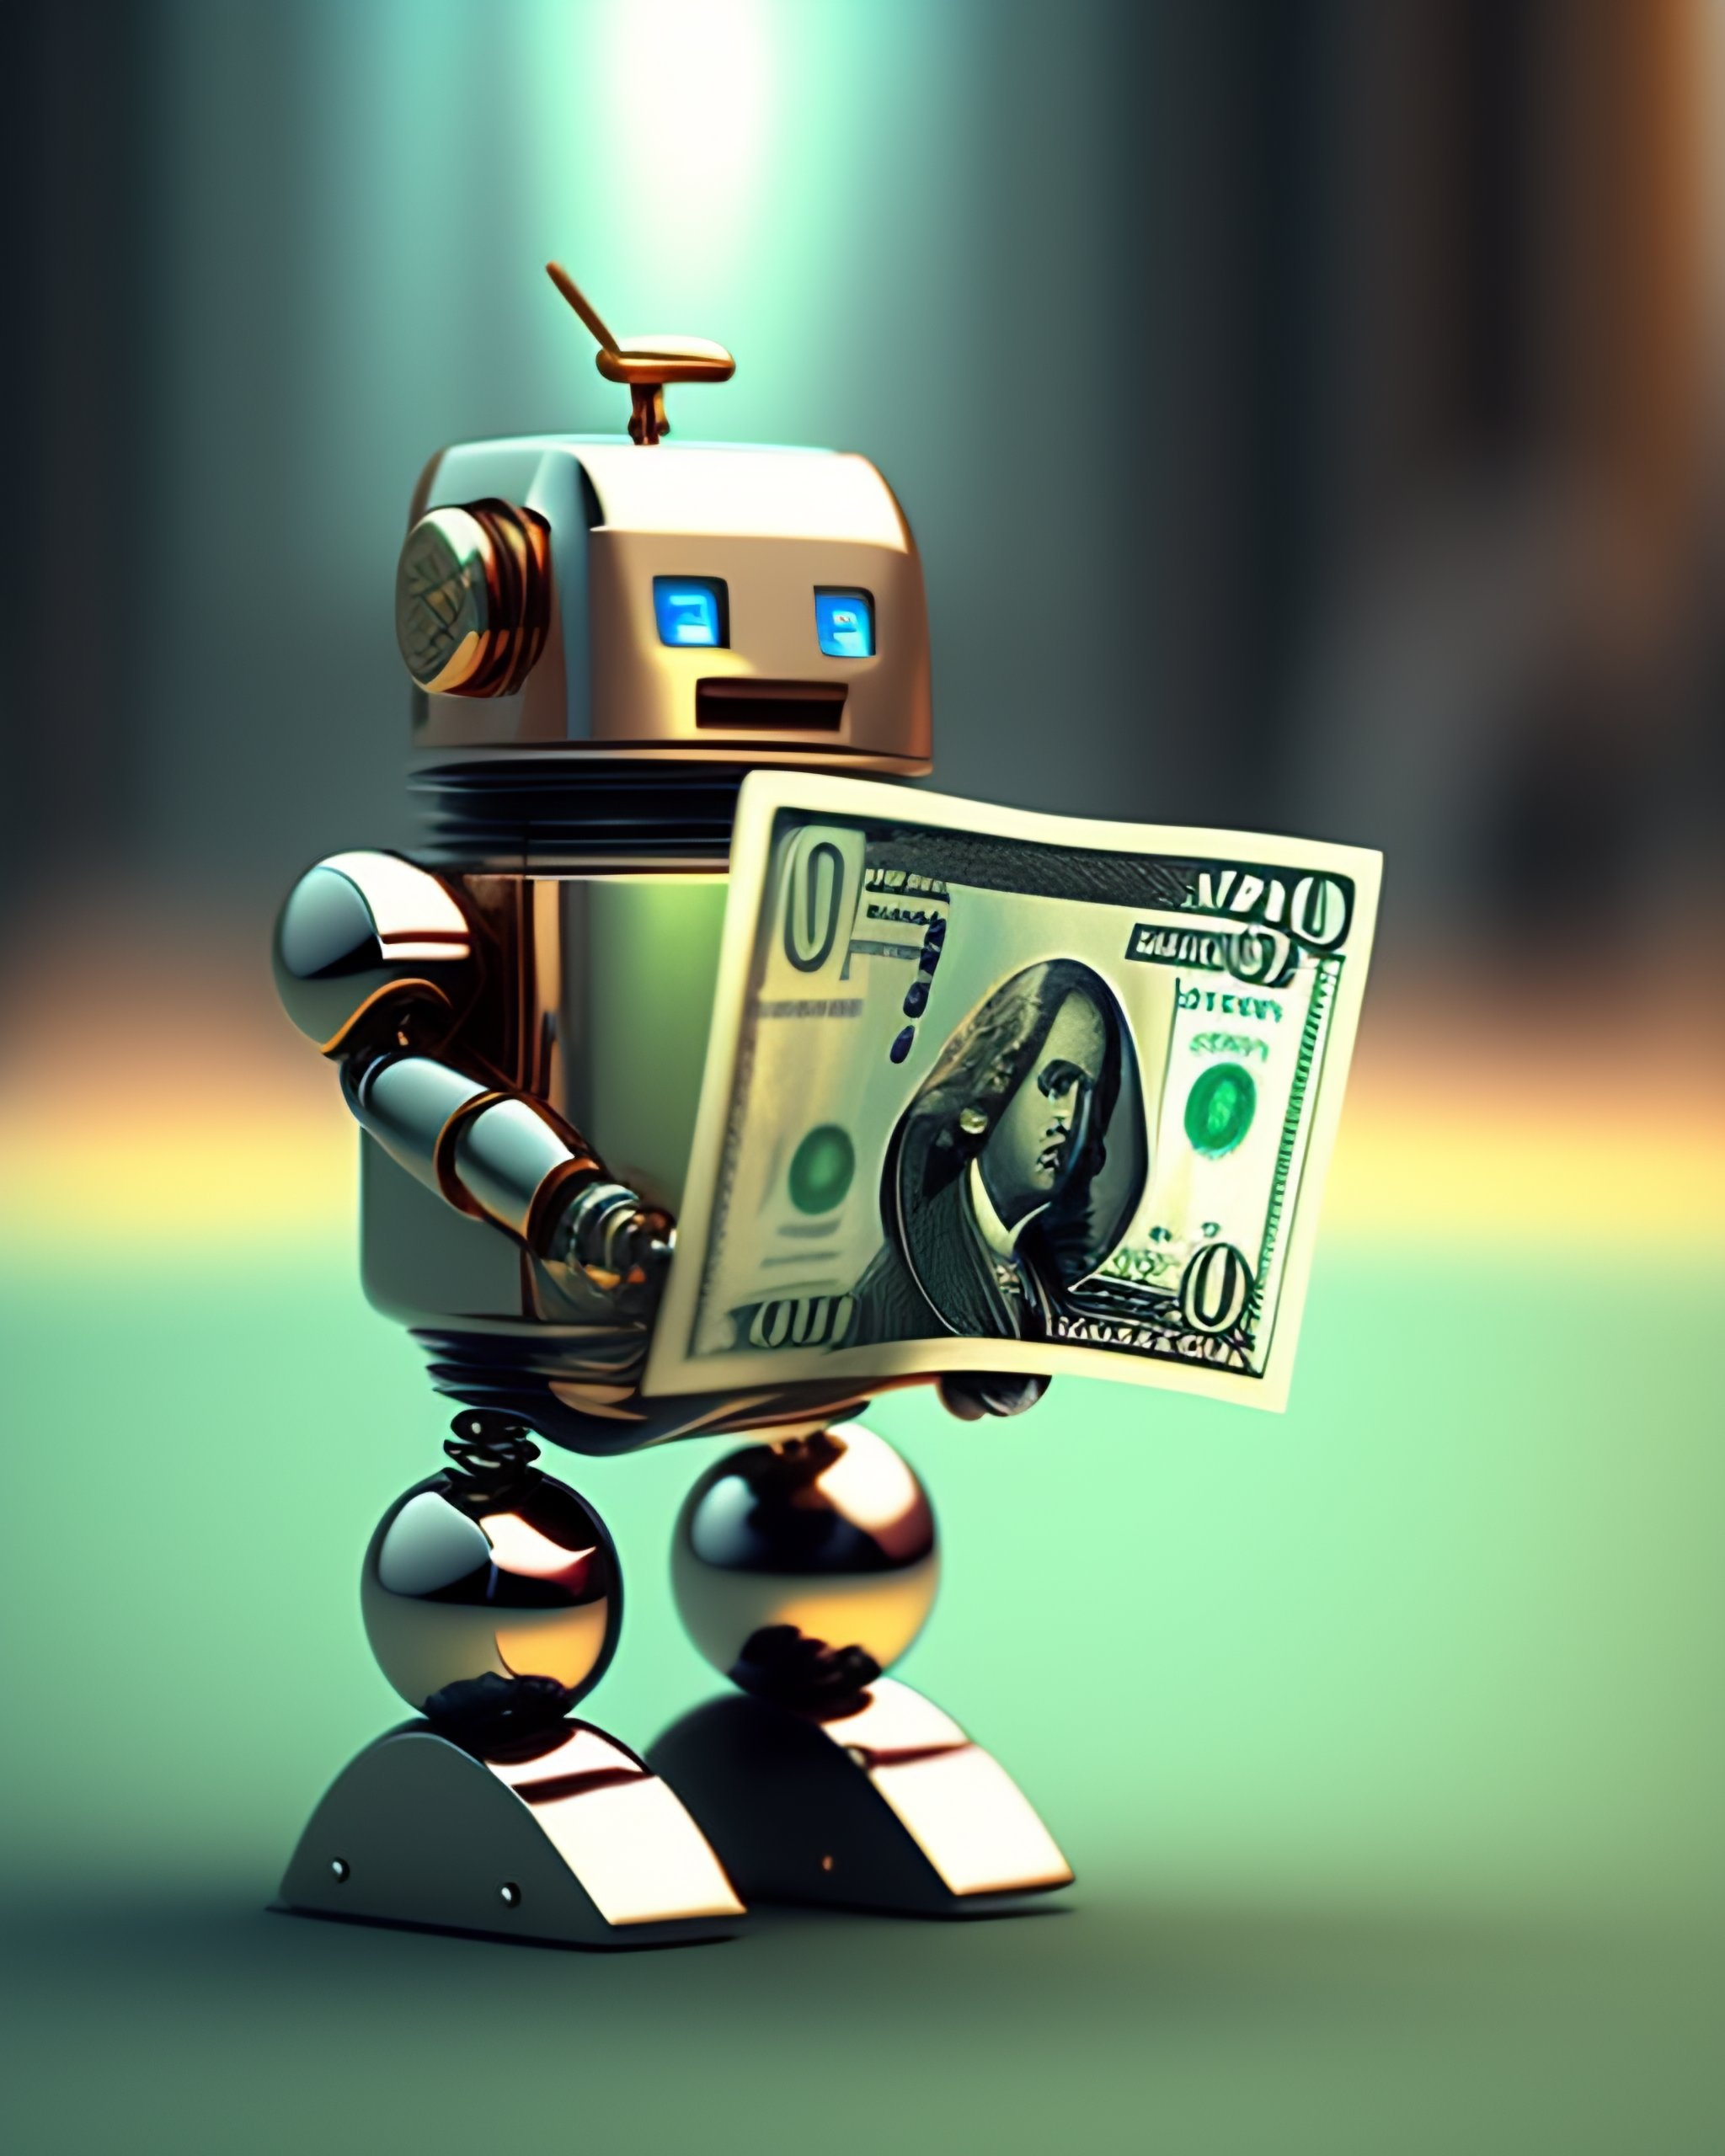 AI will help in personal finance